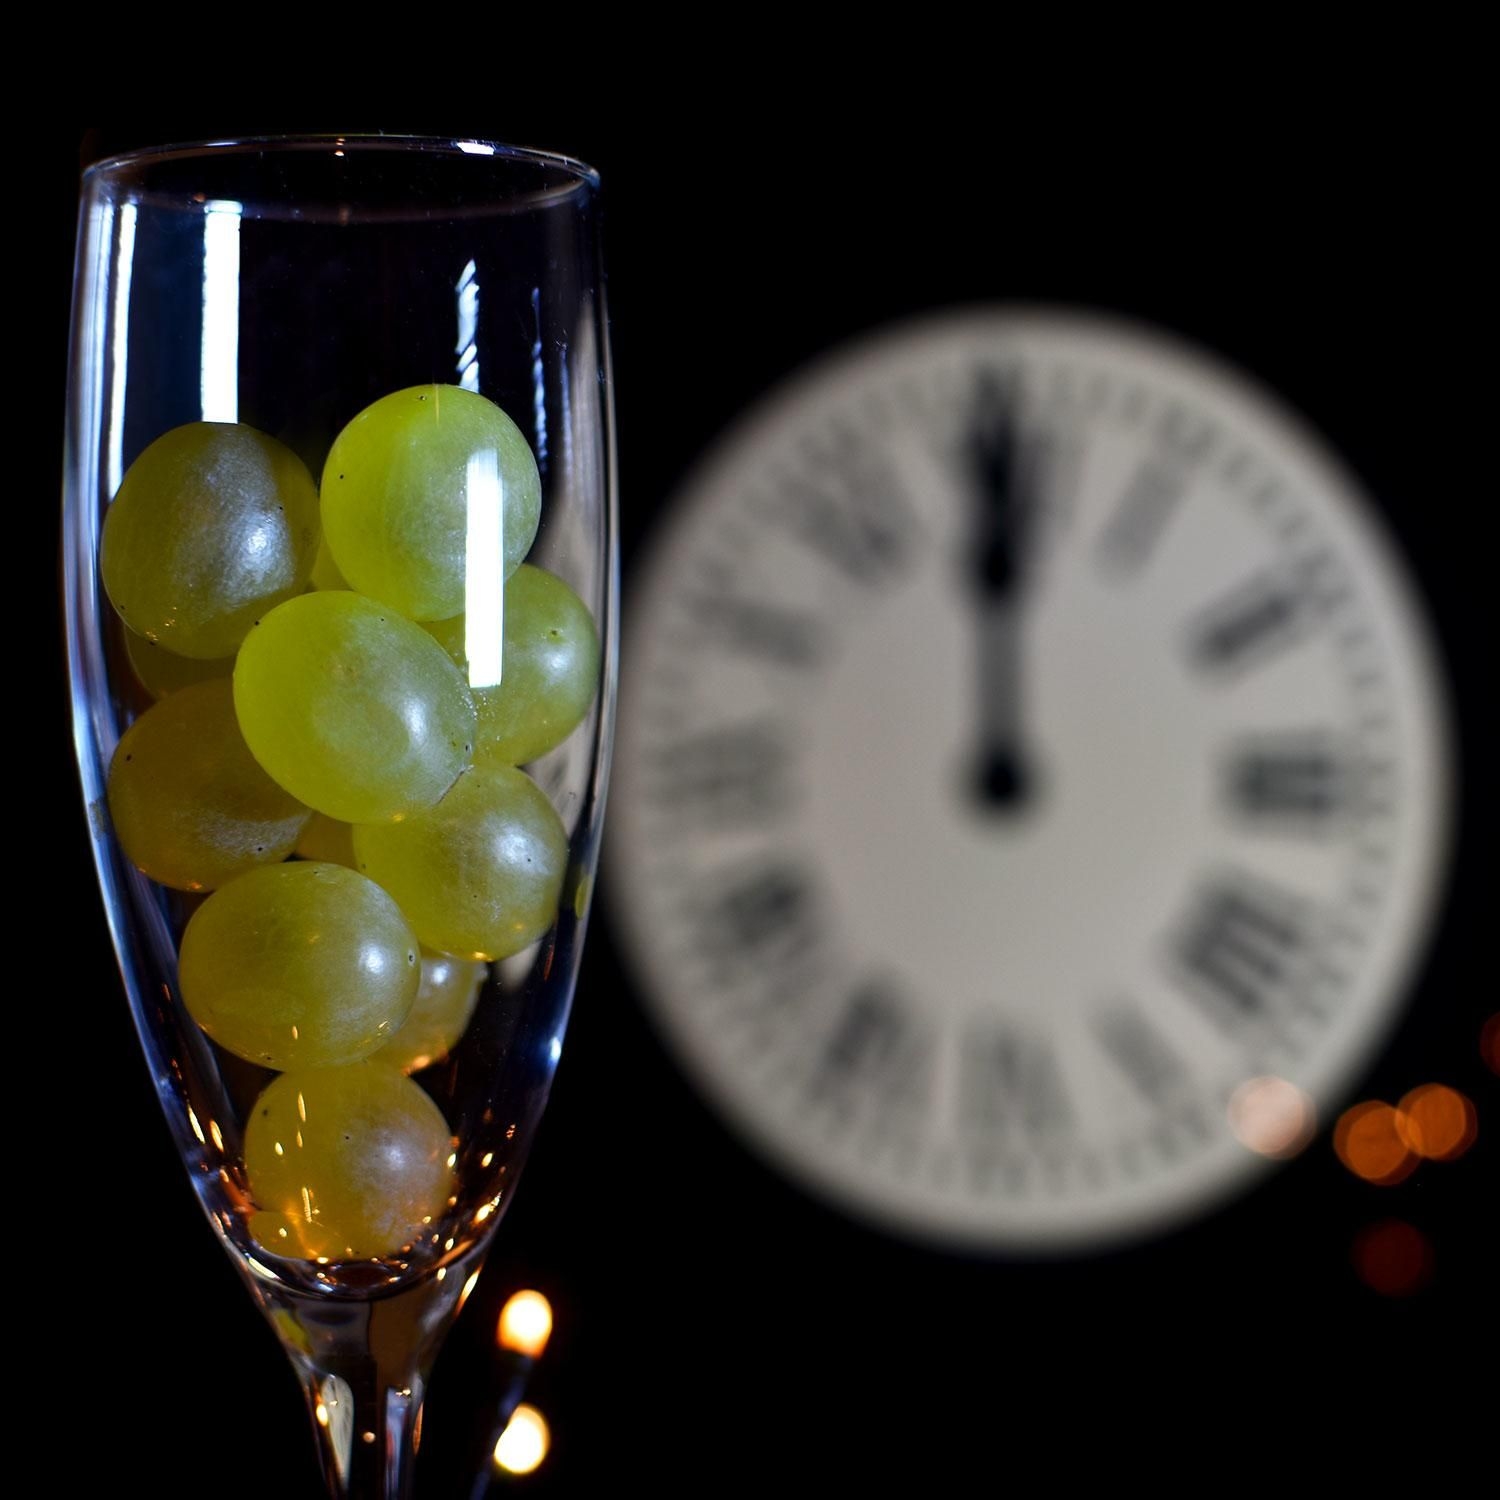 Eating 12 Grapes at Midnight   One of the World's Weirdest Traditions